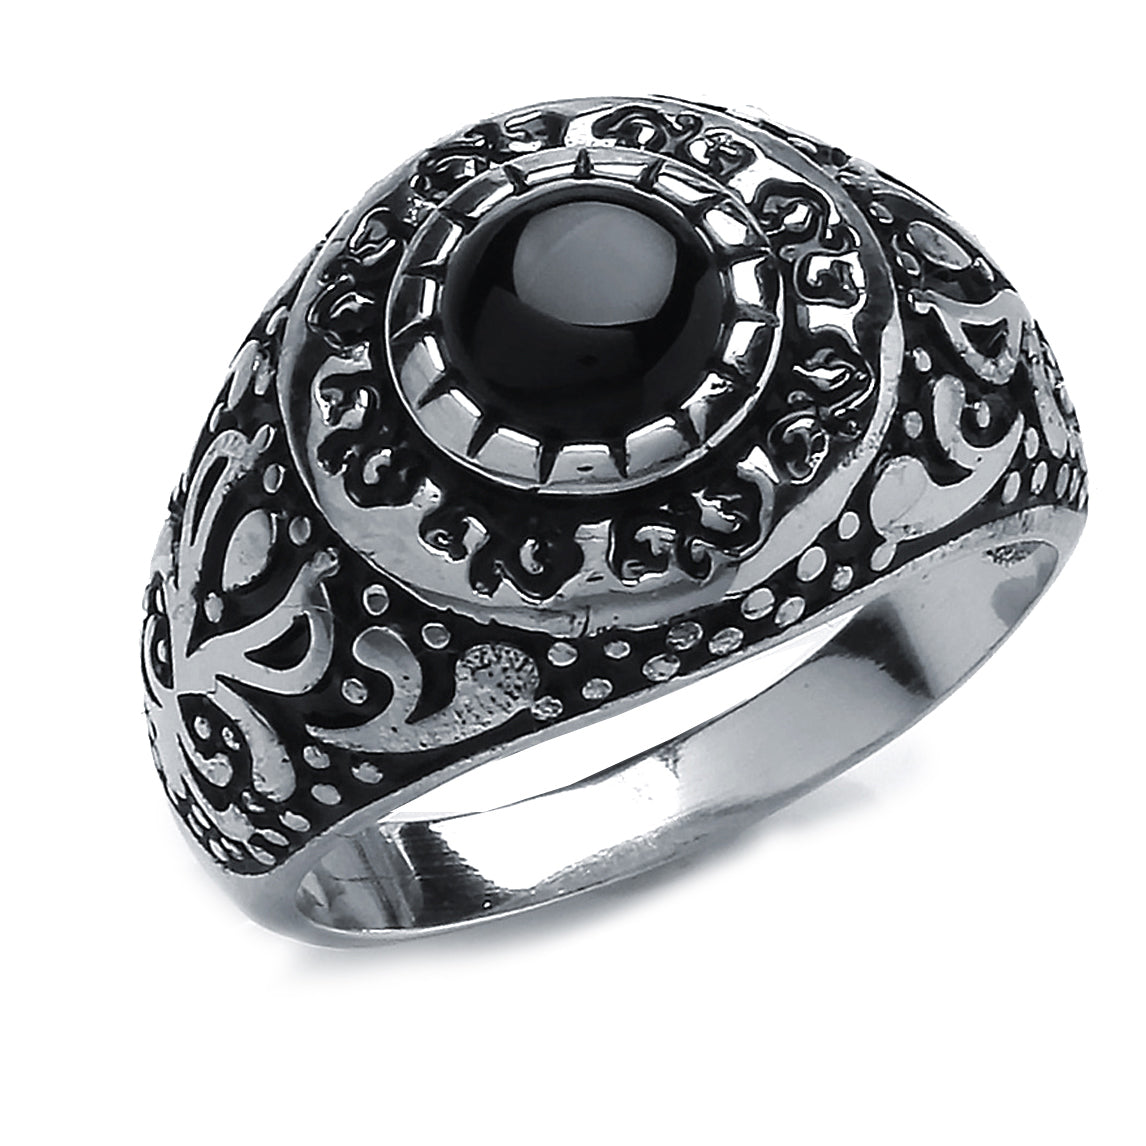 Mens Silver  Black Onyx Carved Cabochon Signet Ring - GVR747